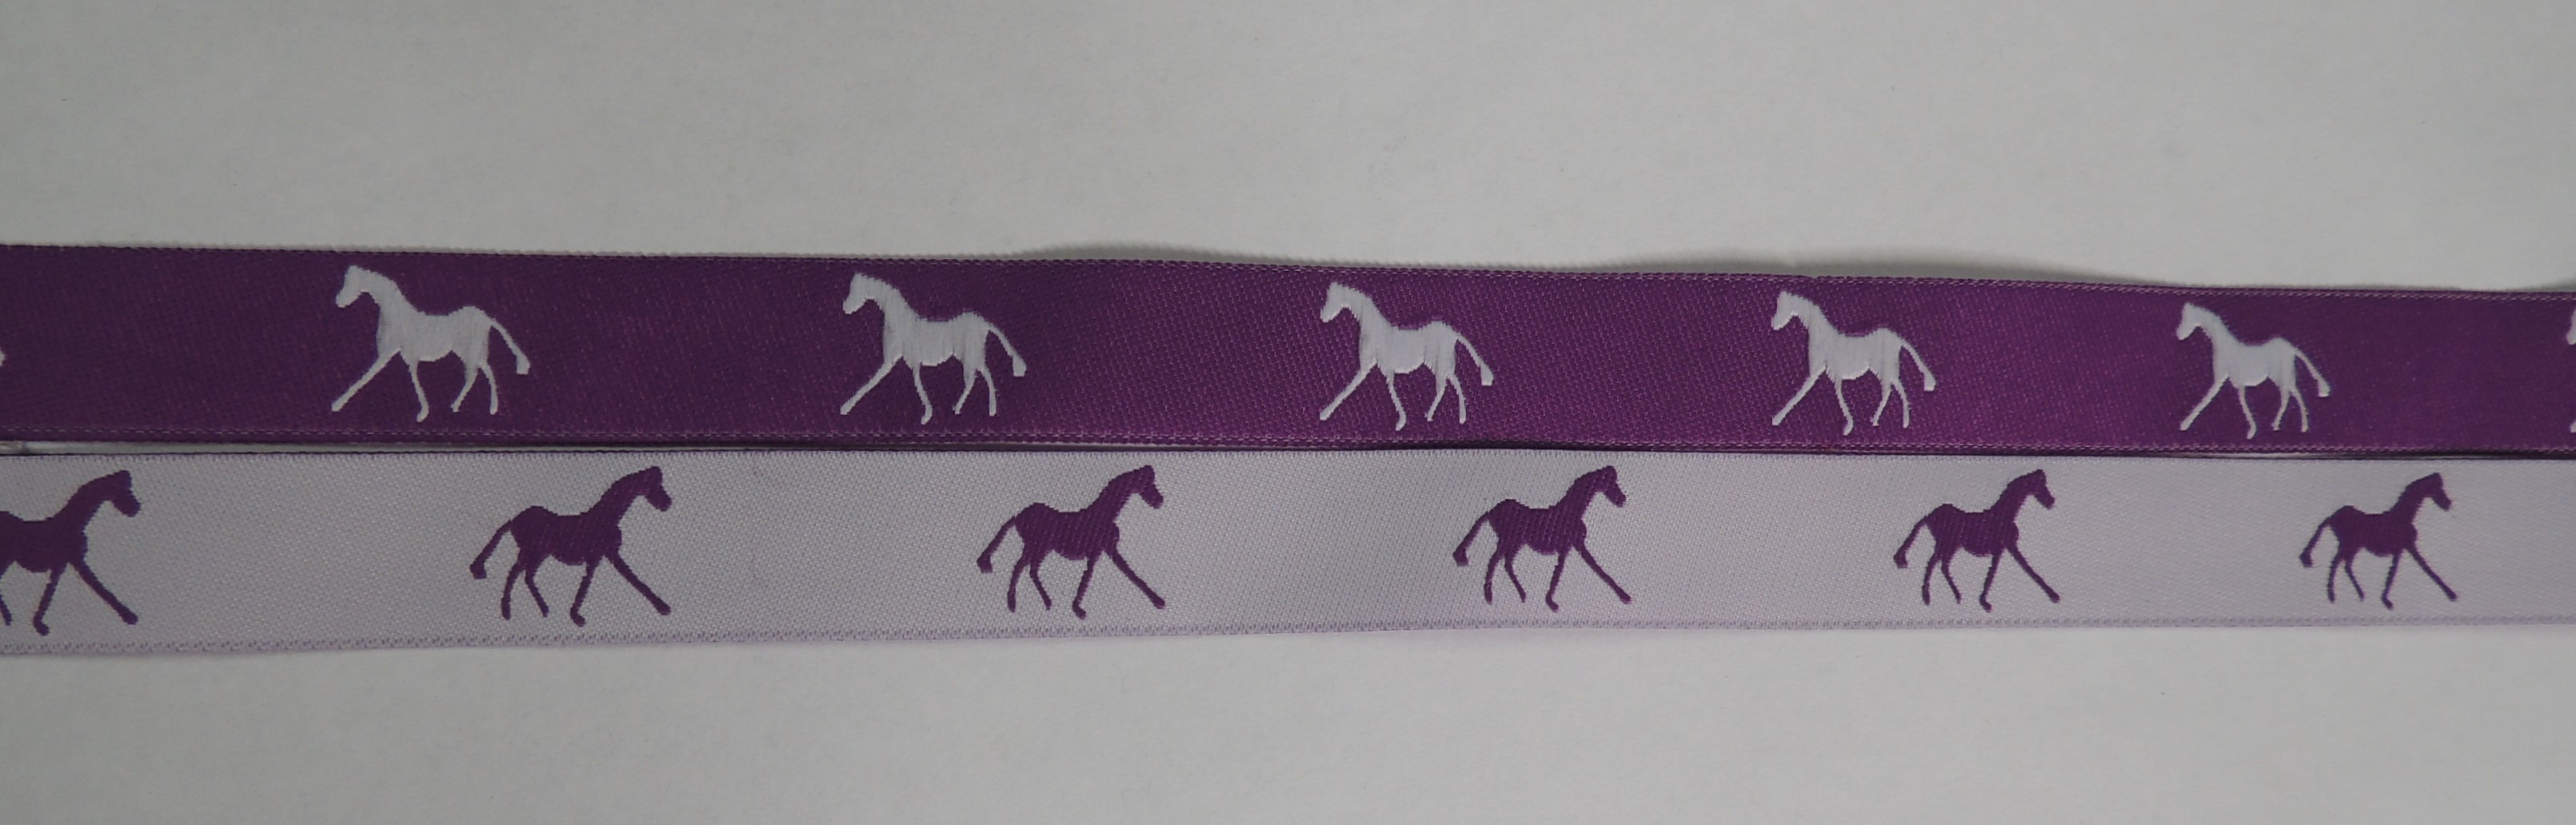 Purple with White horses / White with Purple horses